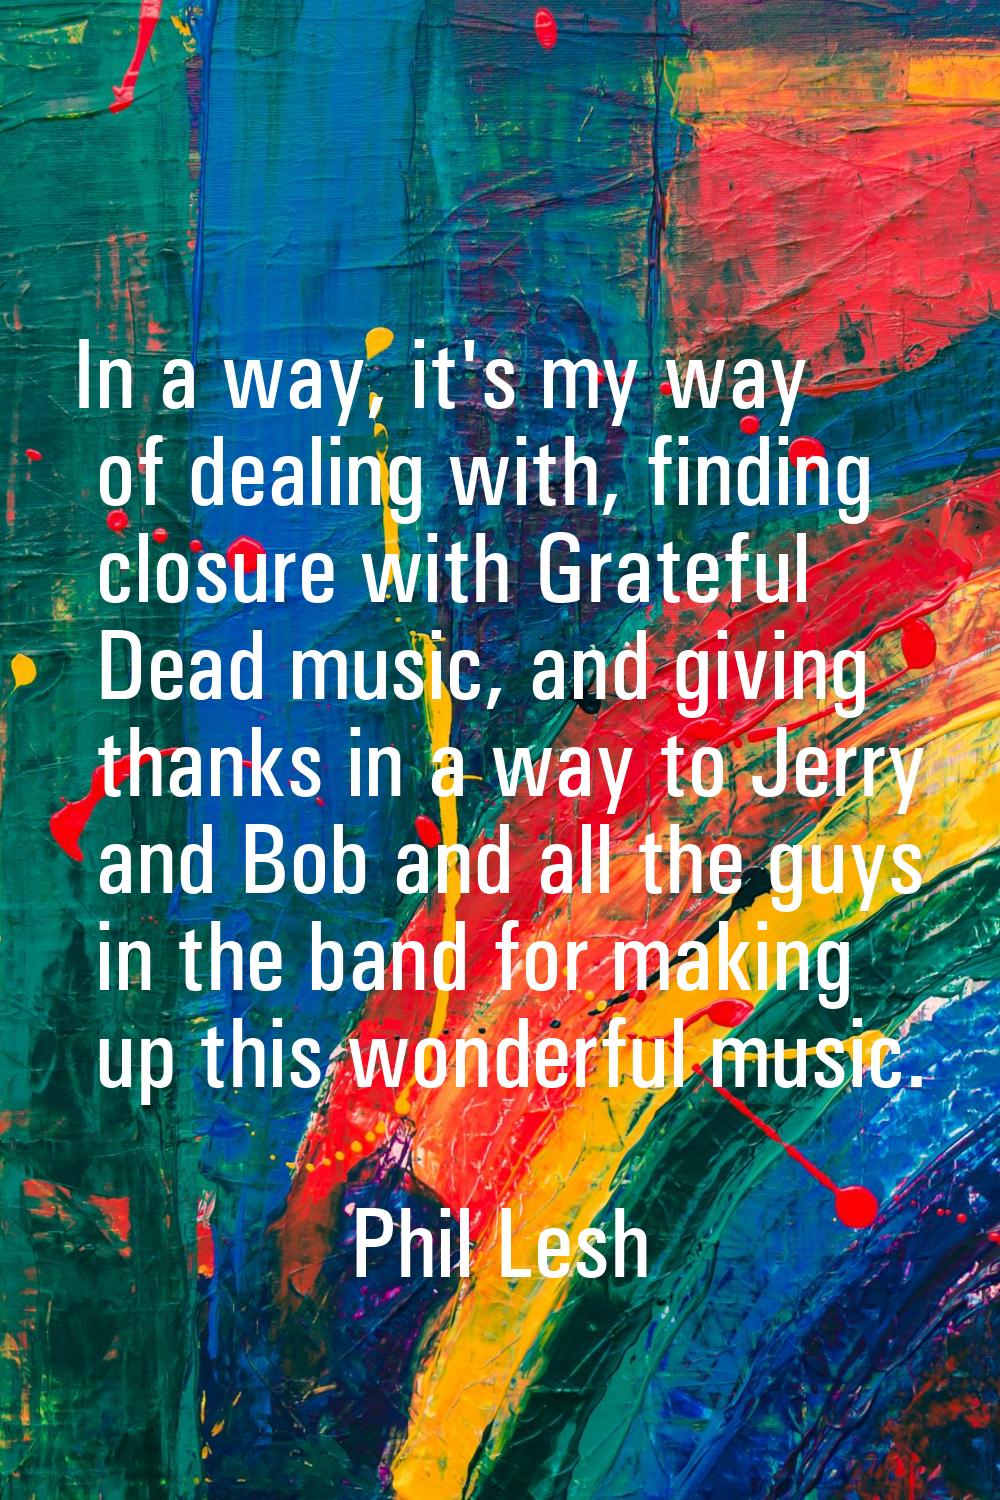 In a way, it's my way of dealing with, finding closure with Grateful Dead music, and giving thanks 